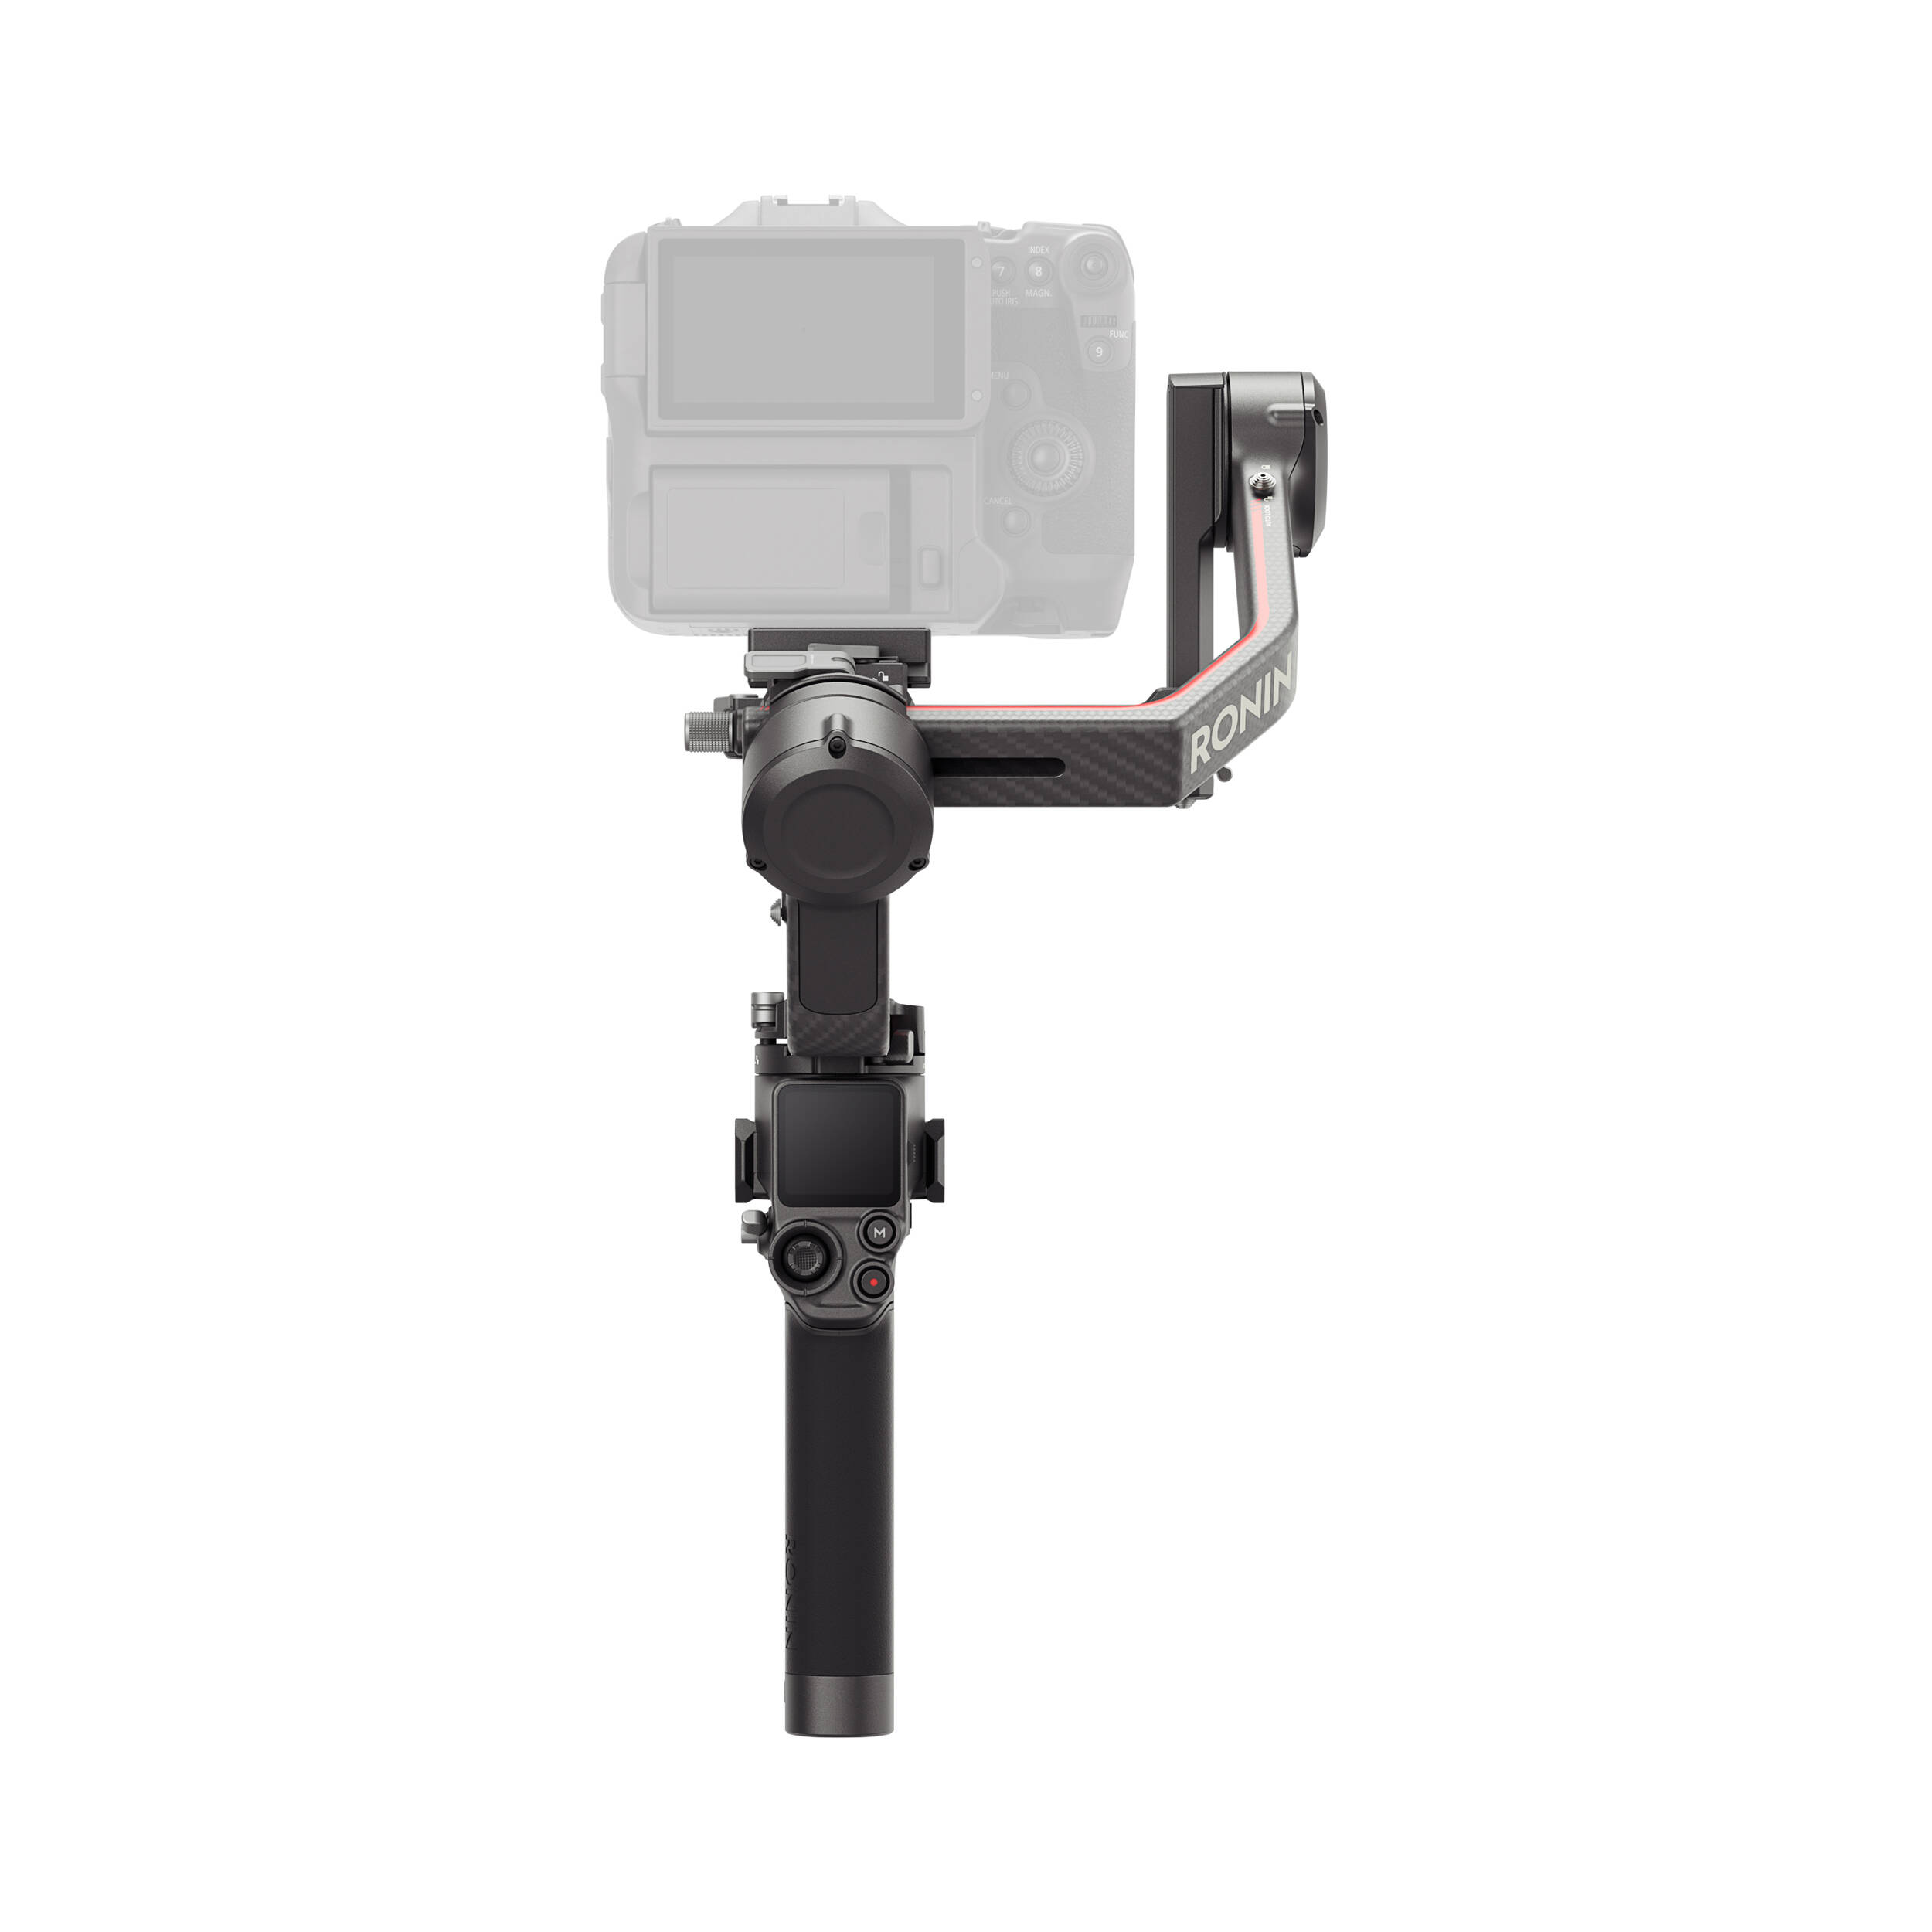 DJI RS 3 Pro Gimbal Stabilizer CP.RN.00000219.01 190021054974